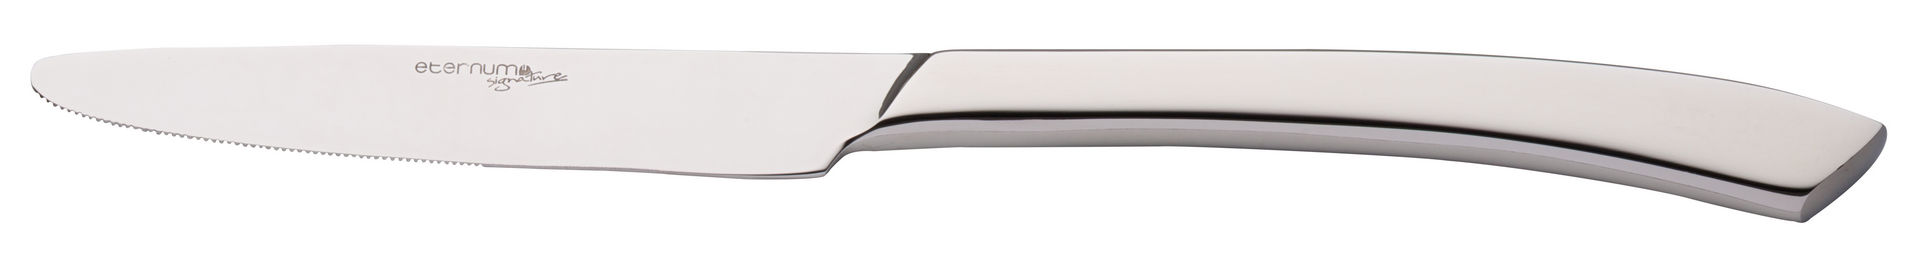 Alinea Table Knife - F23001-000000-B01012 (Pack of 12)